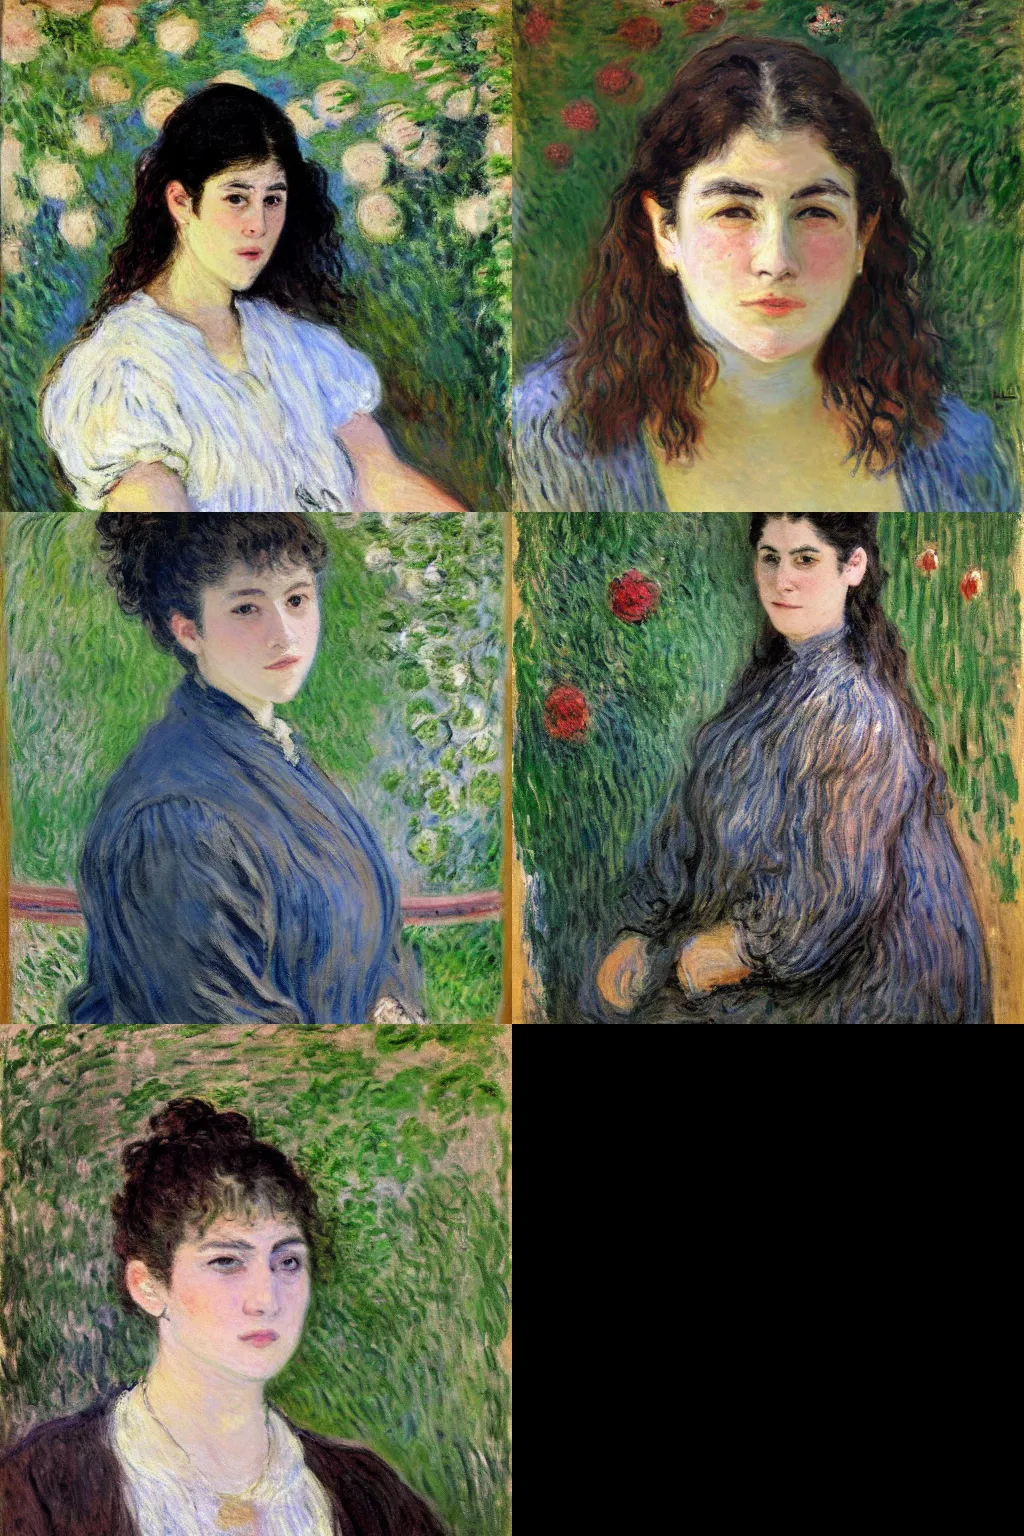 Prompt: an hd painting of a woman by claude monet. she has straight long dark brown hair, parted in the middle. she has large dark brown eyes, a small refined nose, and thin lips. she is wearing a t - shirt with the supreme brand logo lettering on it, a sleeveless white blouse, a pair of dark brown capris, and black loafers.